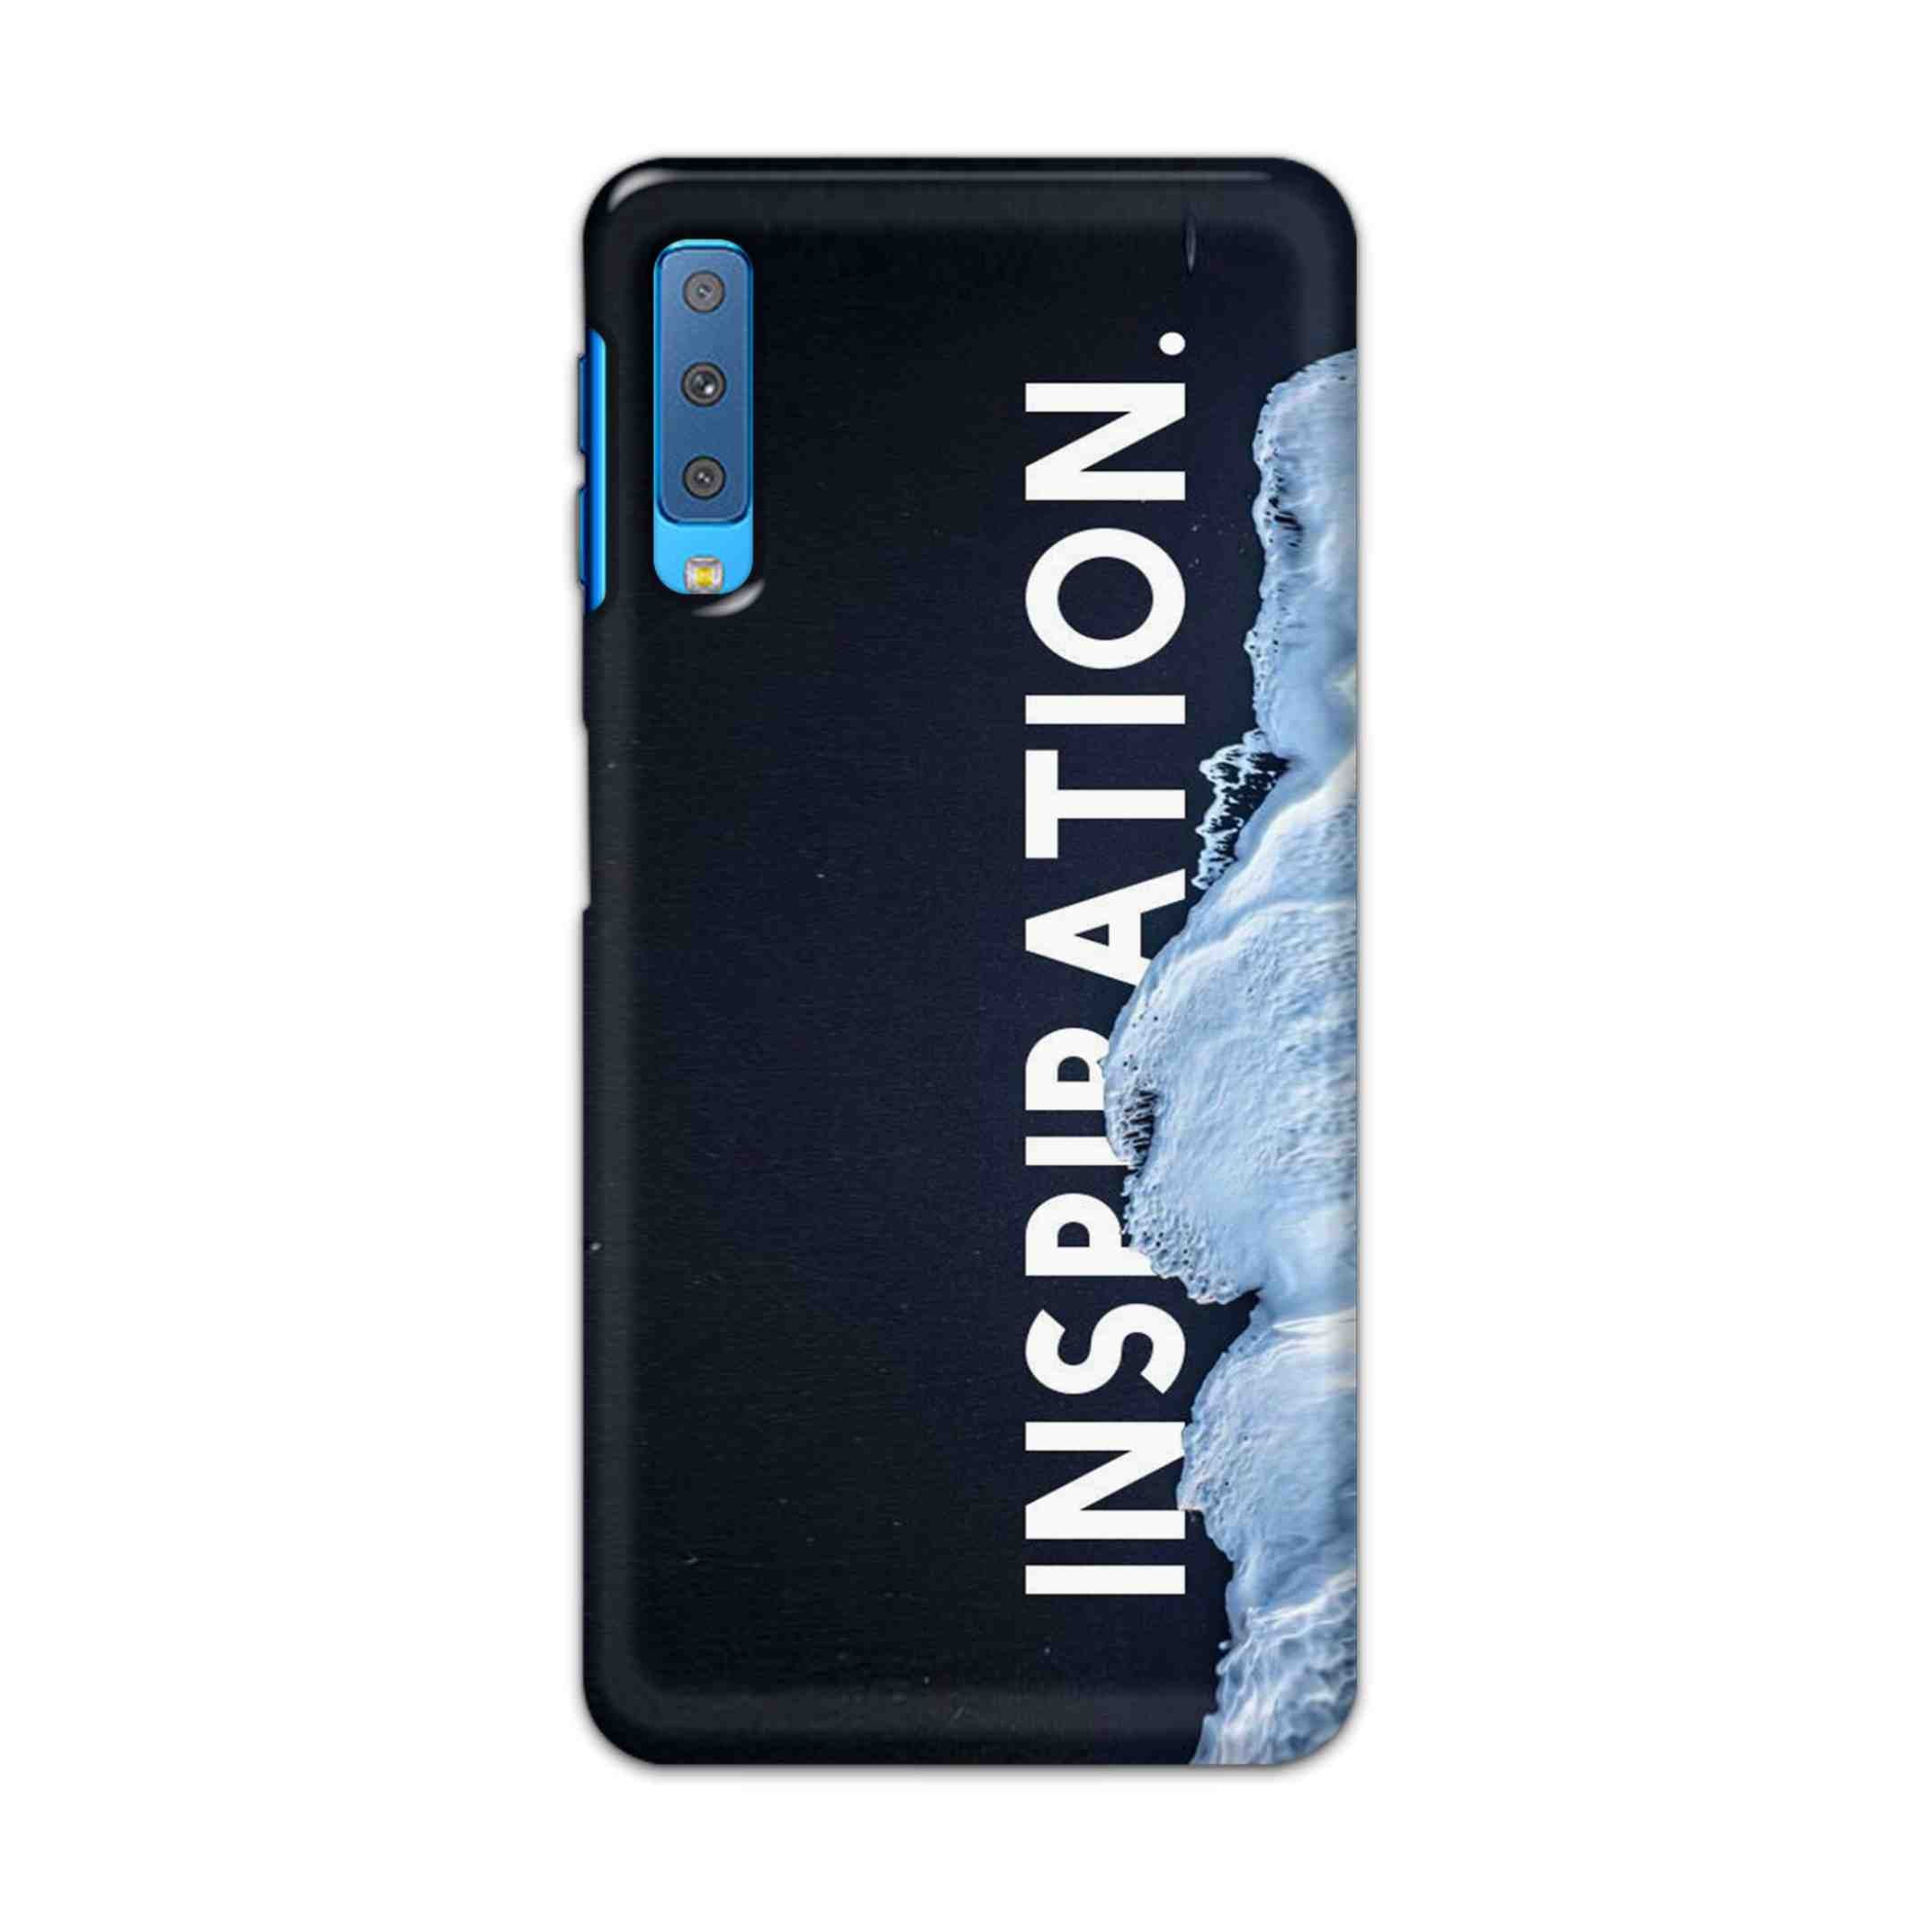 Buy Inspiration Hard Back Mobile Phone Case Cover For Samsung Galaxy A7 2018 Online